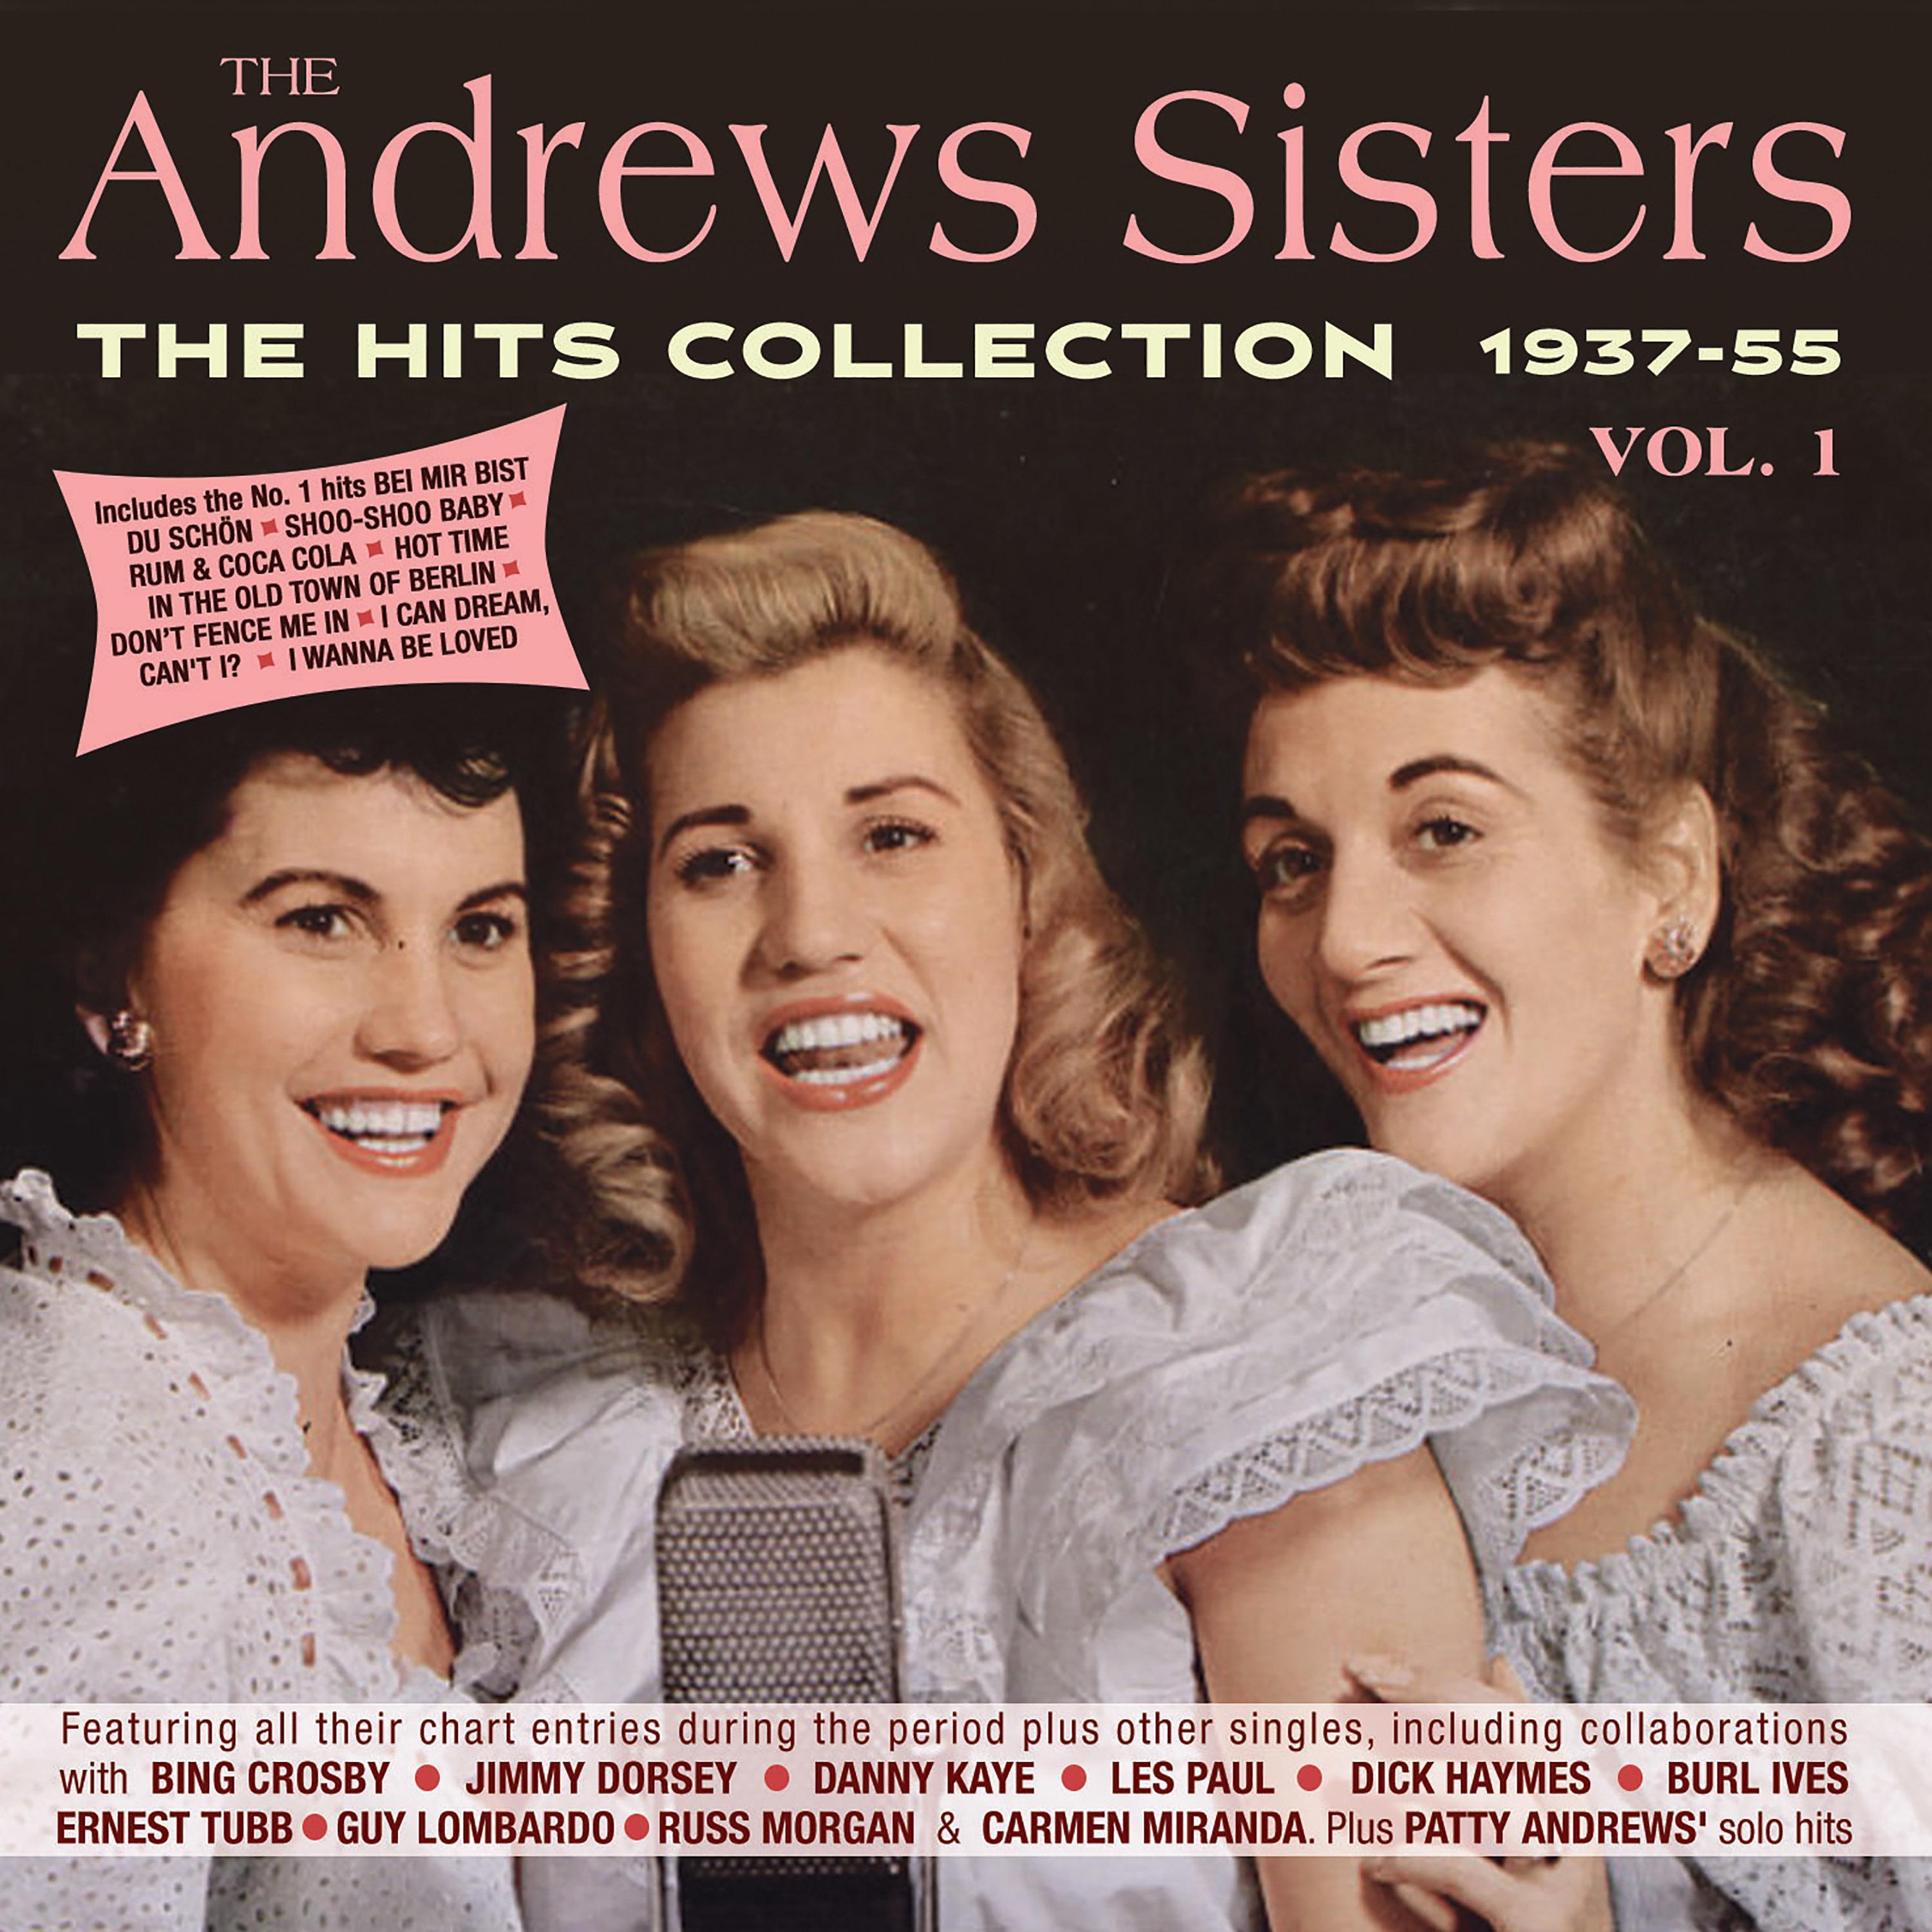 The Hits Collection 1937-55, Vol. 1